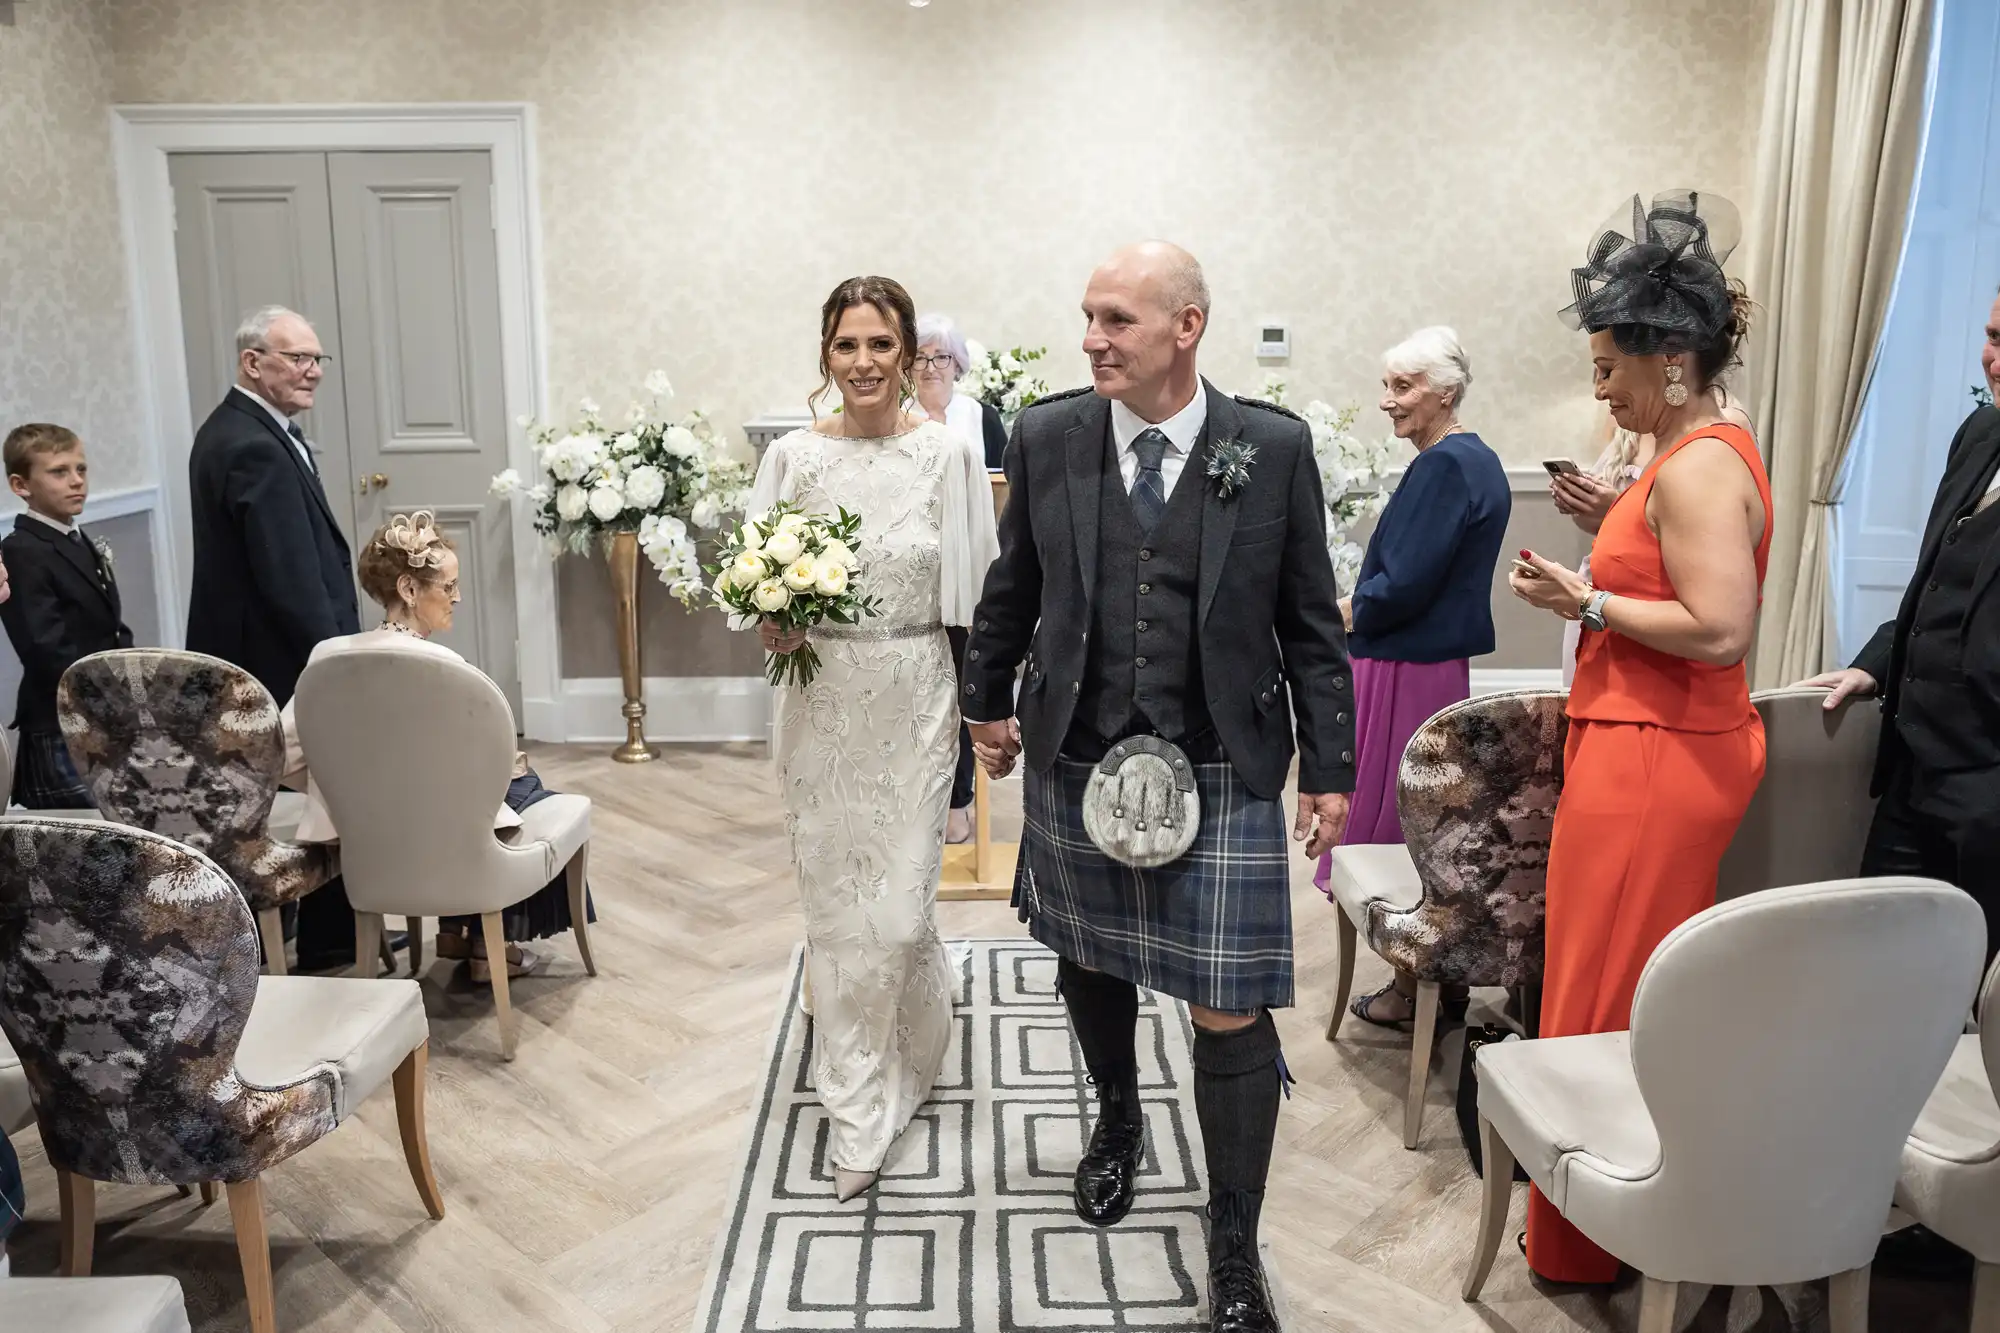 A bride and a man in a kilt walk down the aisle in a small, well-lit room with guests seated on both sides. The bride holds a bouquet and wears a white dress. The man wears traditional Scottish attire.